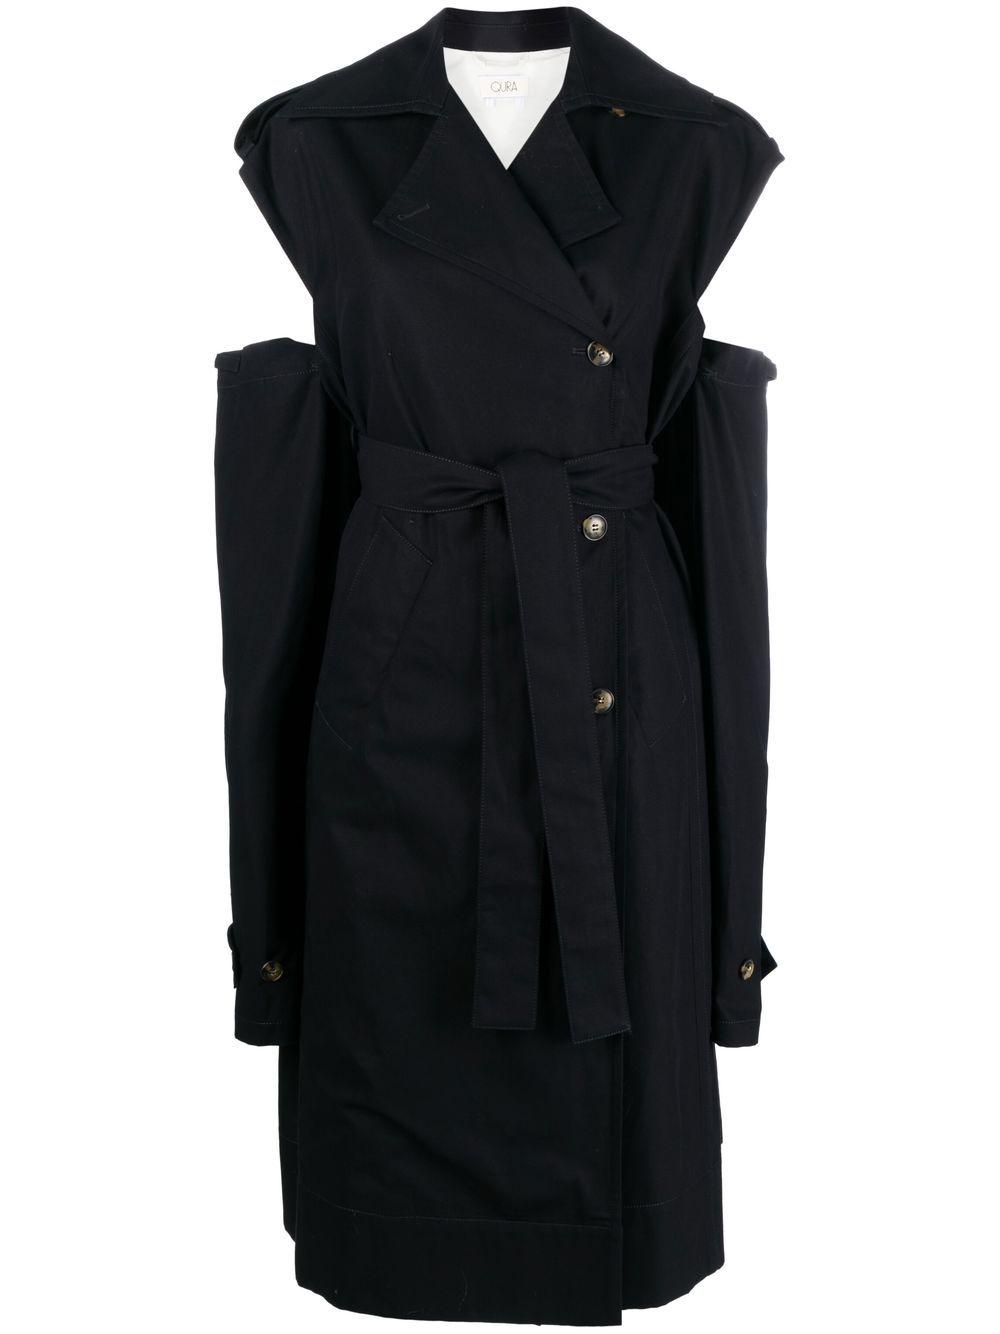 Quira Belted-waist Trench Dress in Black | Lyst